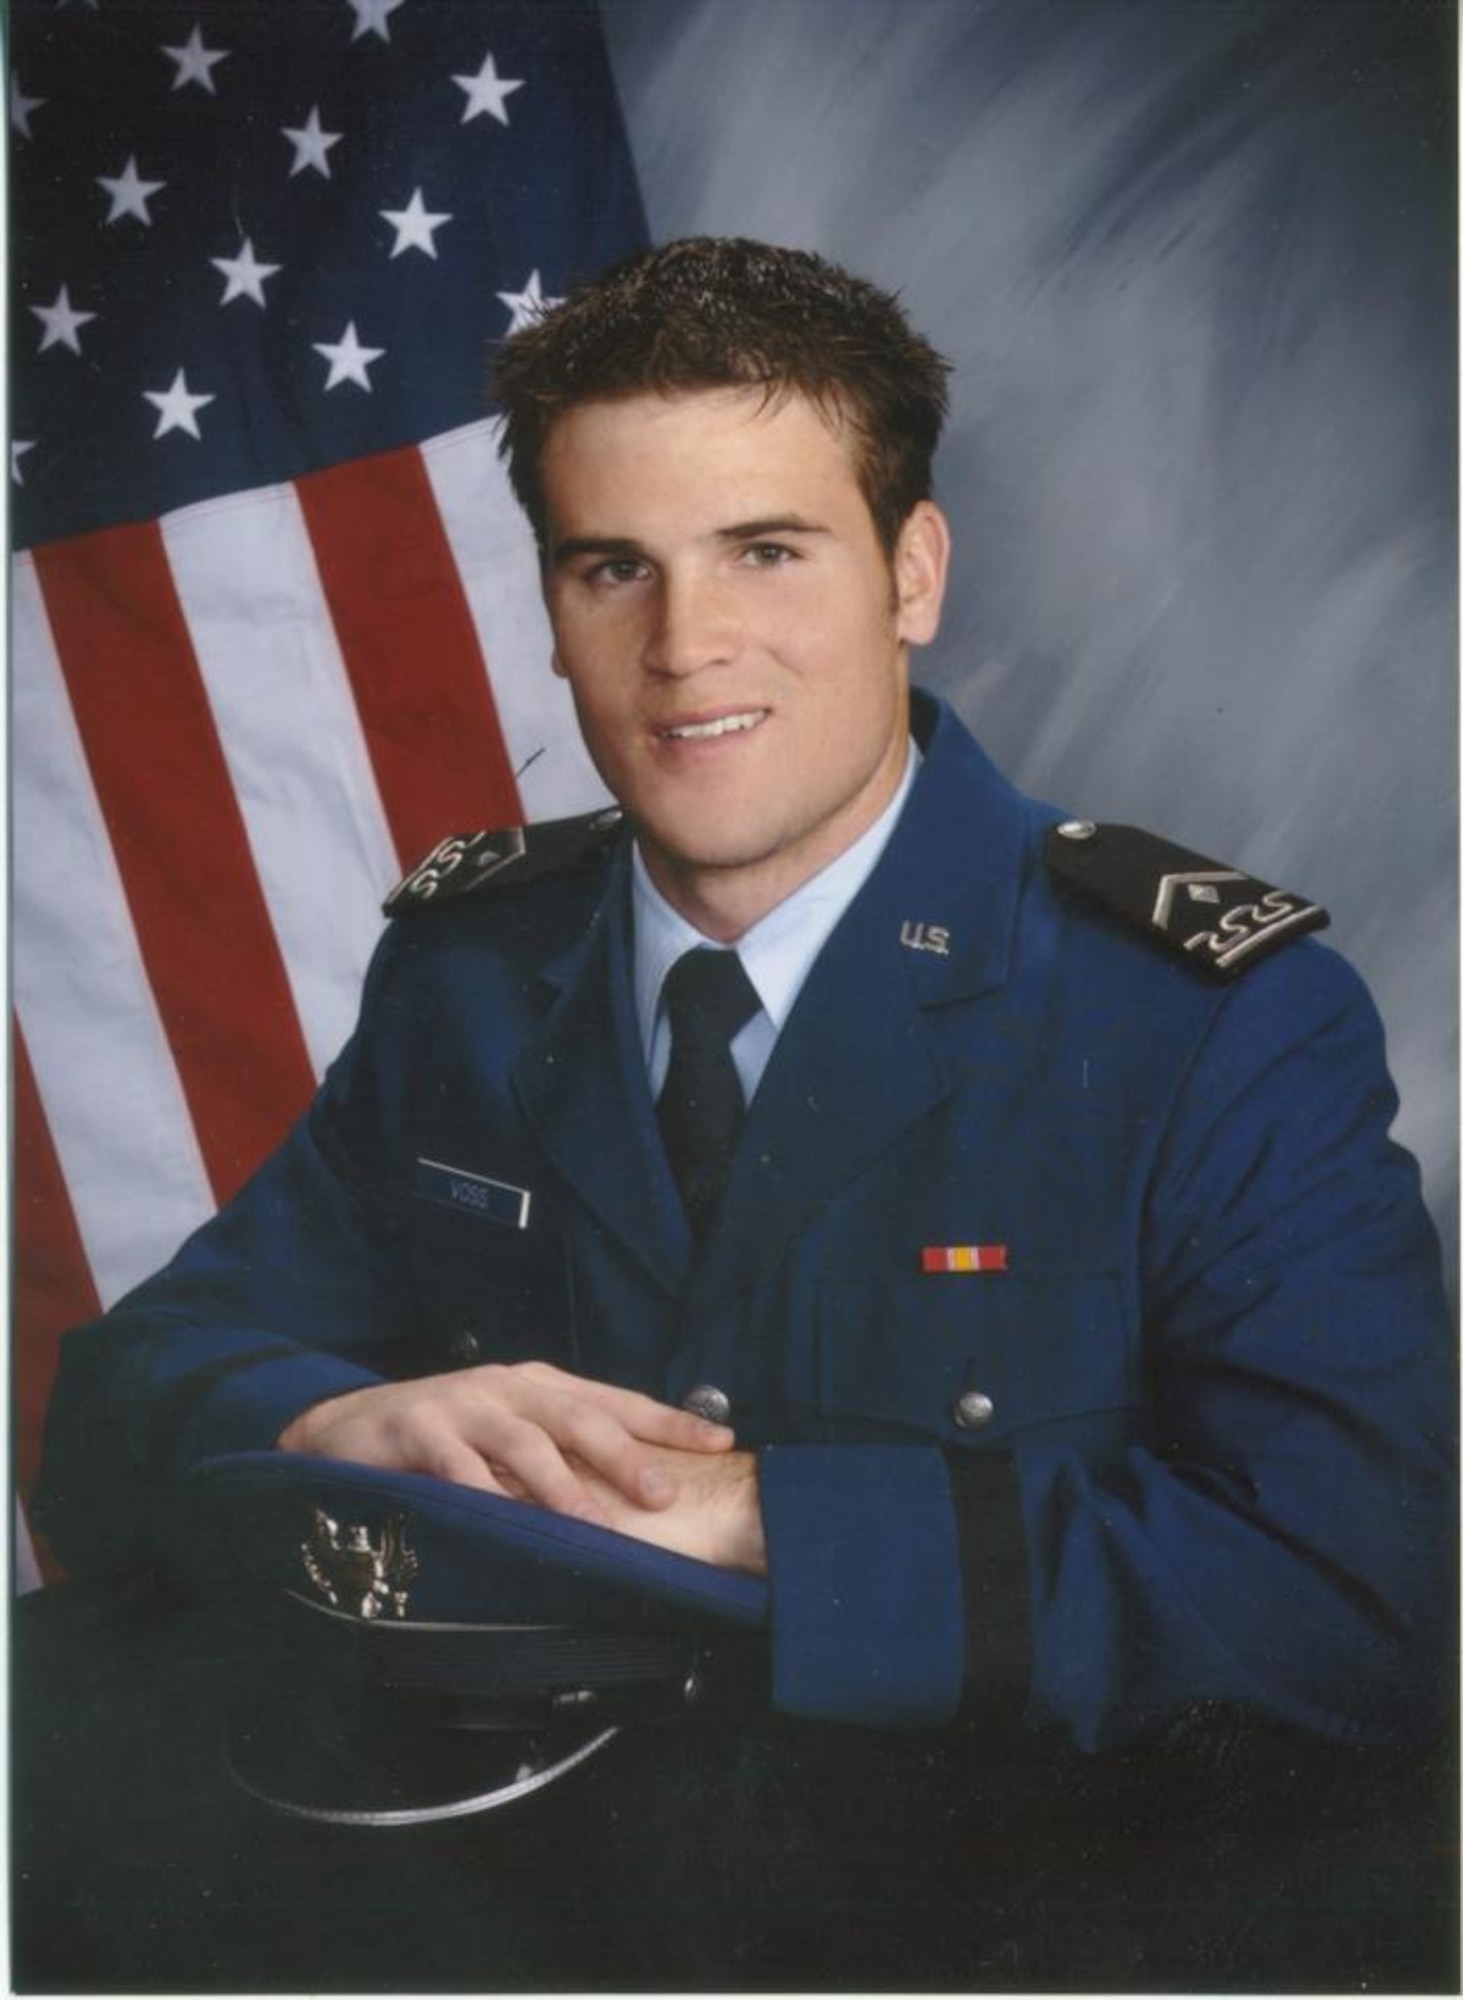 Captain Mark T. "Tyler" Voss, 27, from Boerne, Texas, shown here in an Air Force Academy photo, died on 3 May when his aircraft crashed shortly after takeoff near Bishkek, Kyrgyzstan. (Courtesy photo)